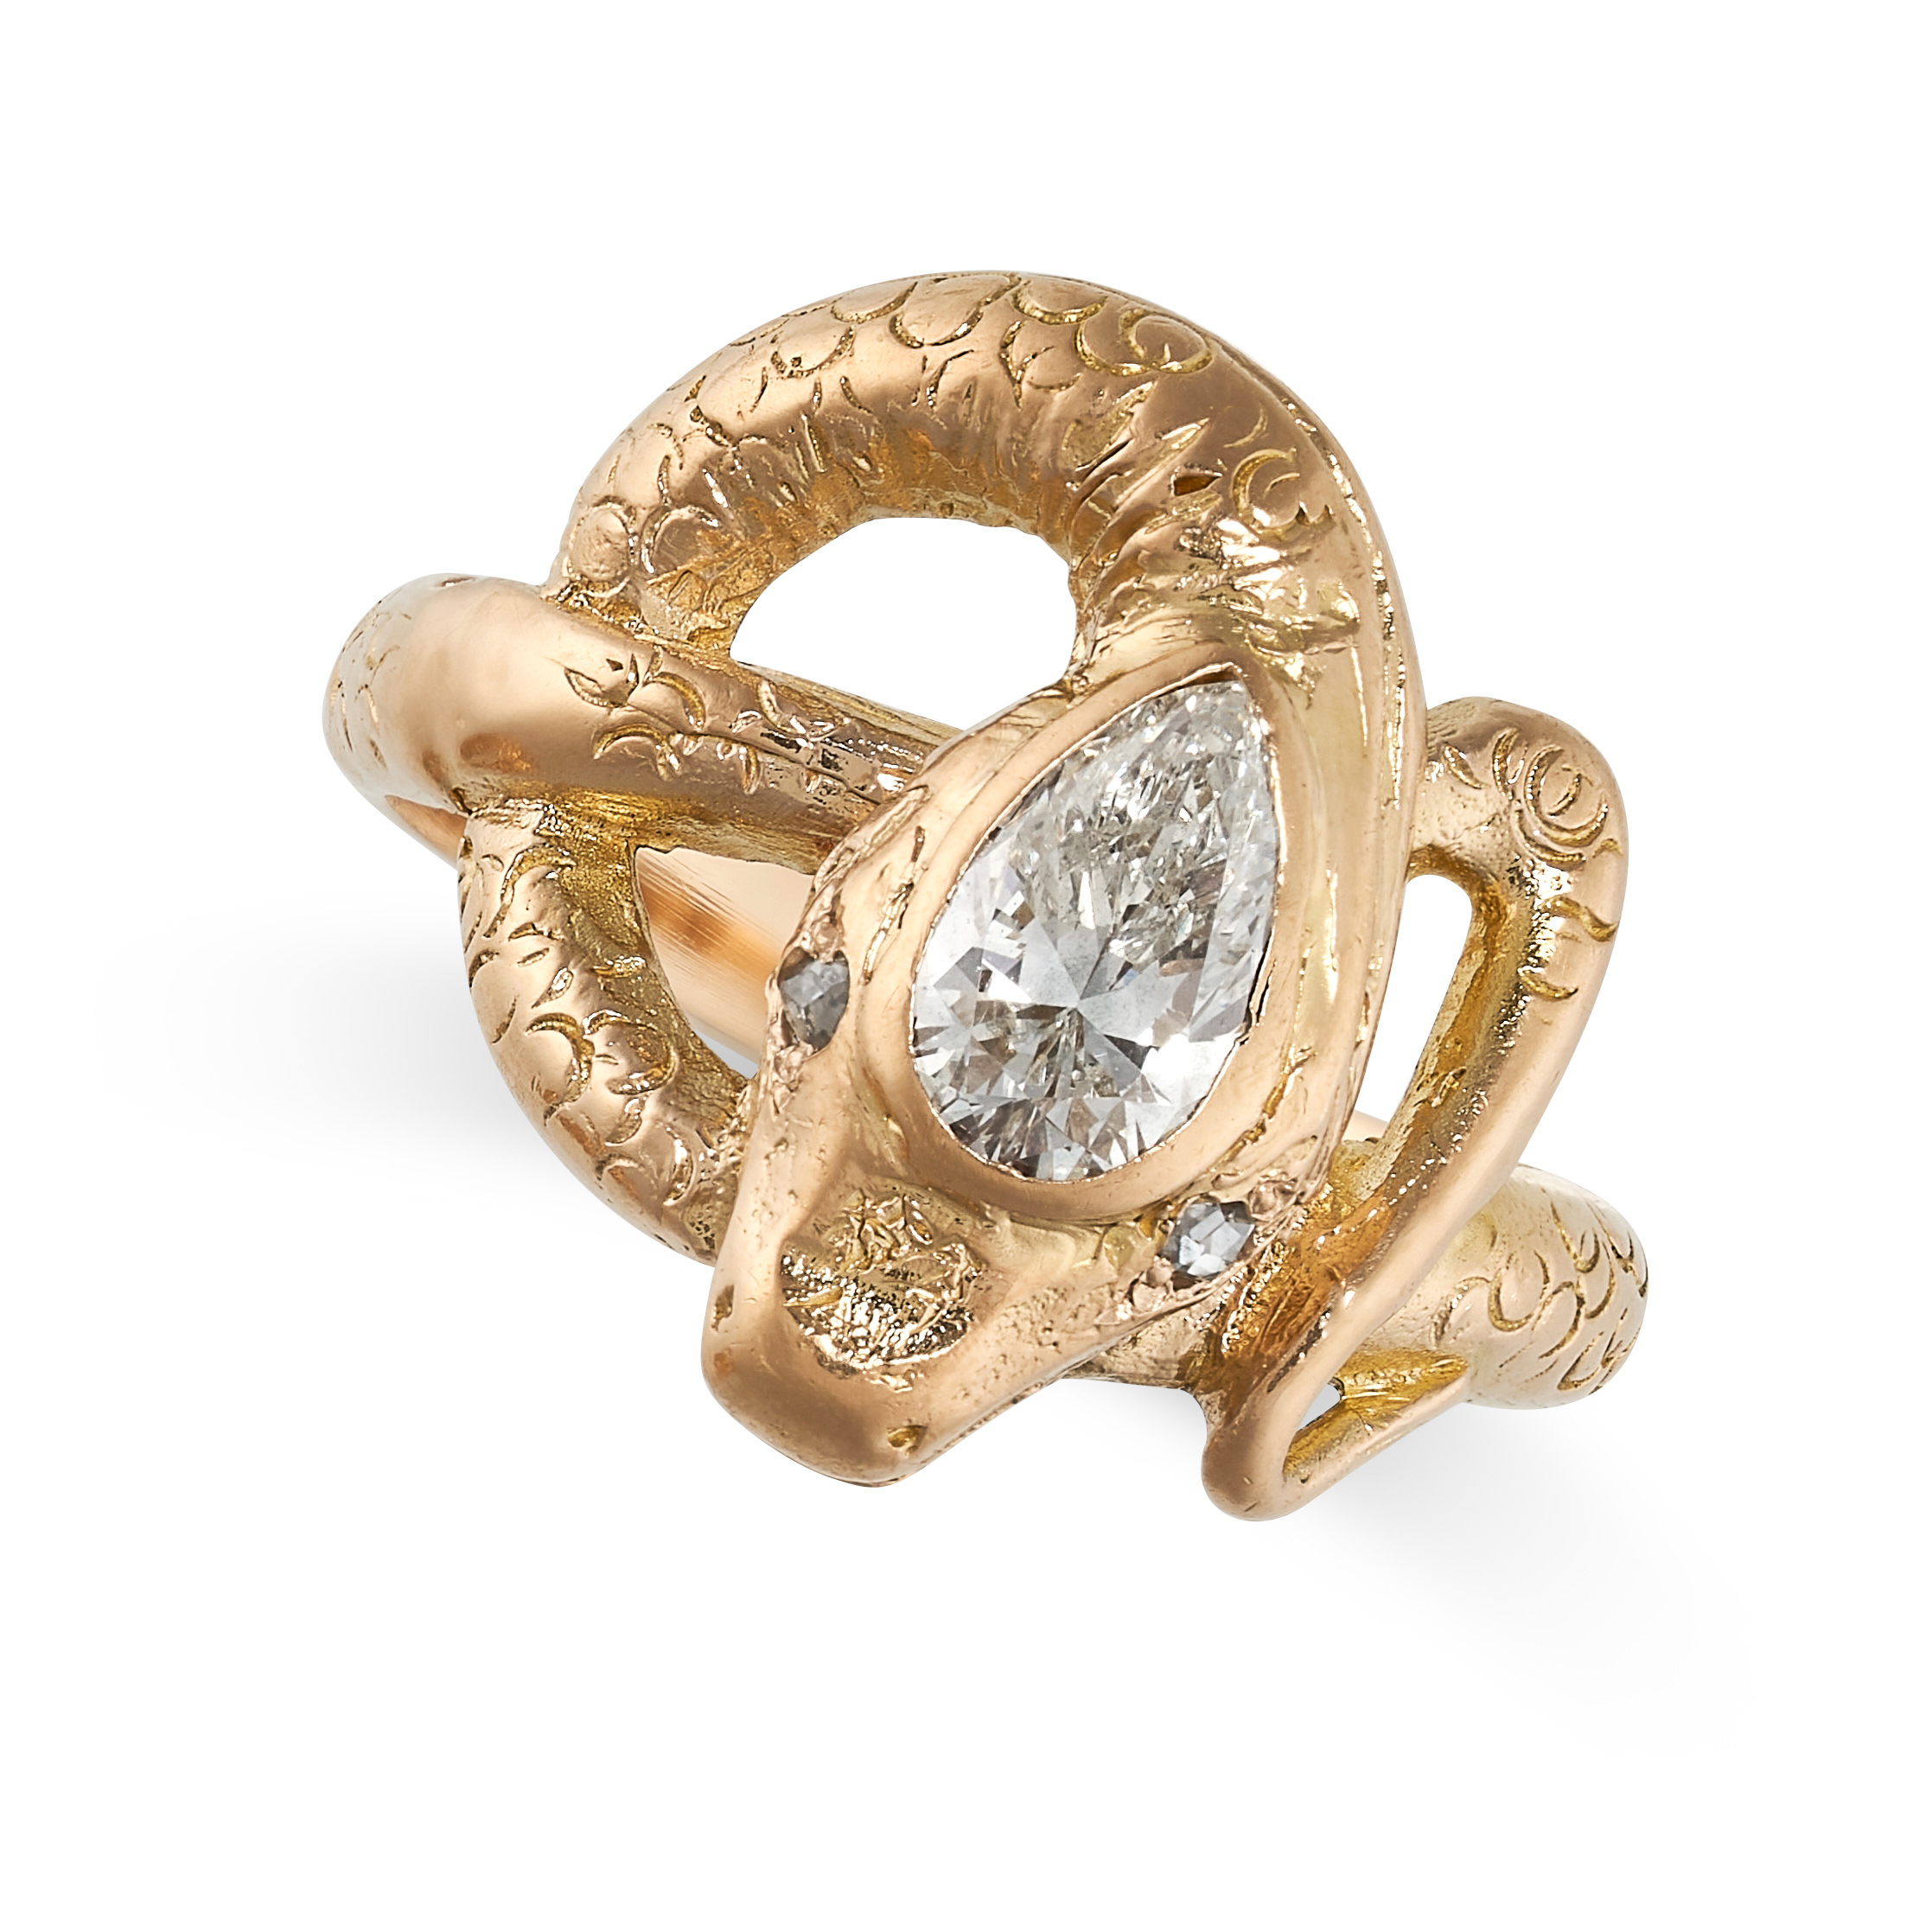 A DIAMOND SNAKE RING in 18ct yellow gold, designed as a coiled snake, set with a pear cut diamond of